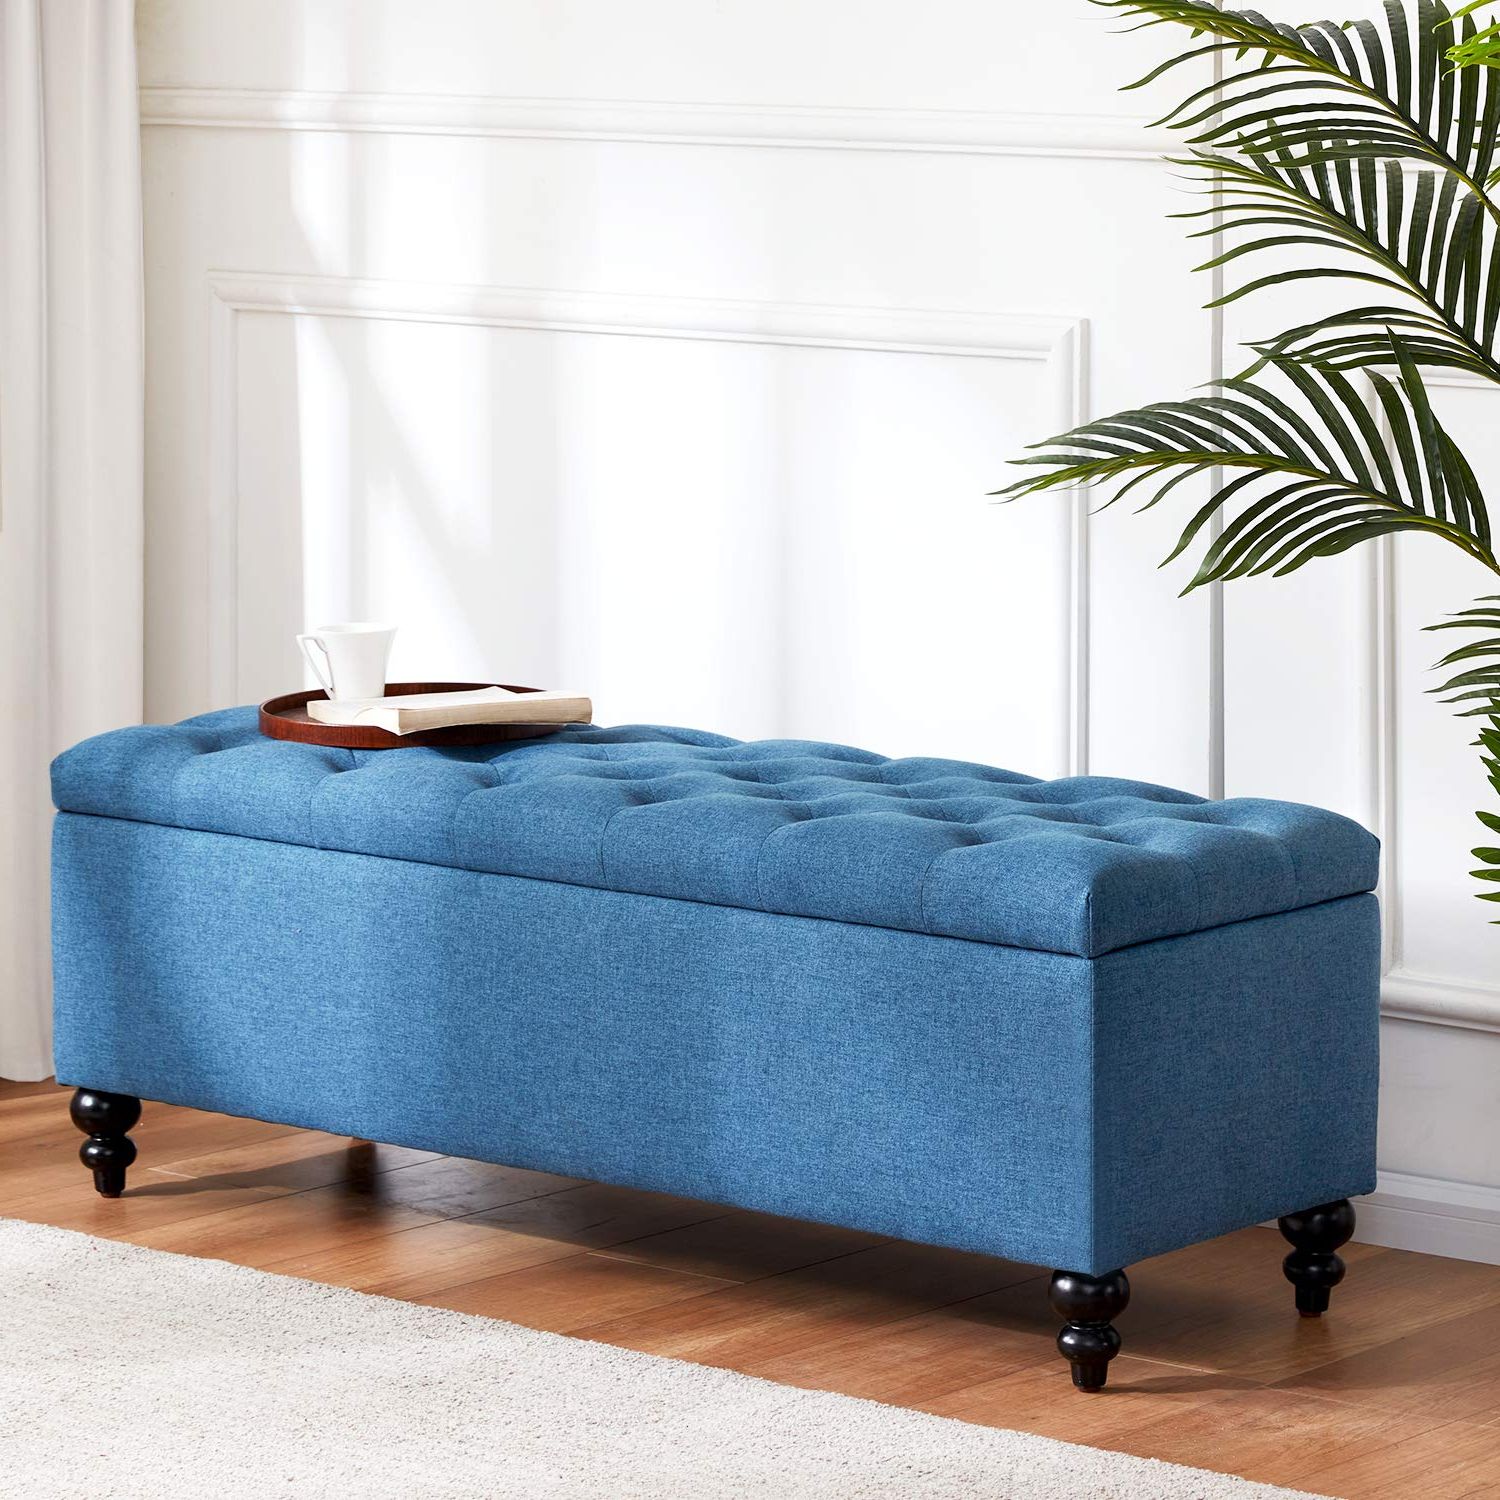 Fashionable Fabric Upholstered Ottomans With Amazon: Huimo Button Tufted Ottoman With Storage In Upholstered Fabrics,  Large Storage Bench For Bedroom, Living Room, Entryway, Storage Ottoman  Bench With Safety Hinge Hold Up To 300lbs (blue) : Home & Kitchen (View 7 of 10)